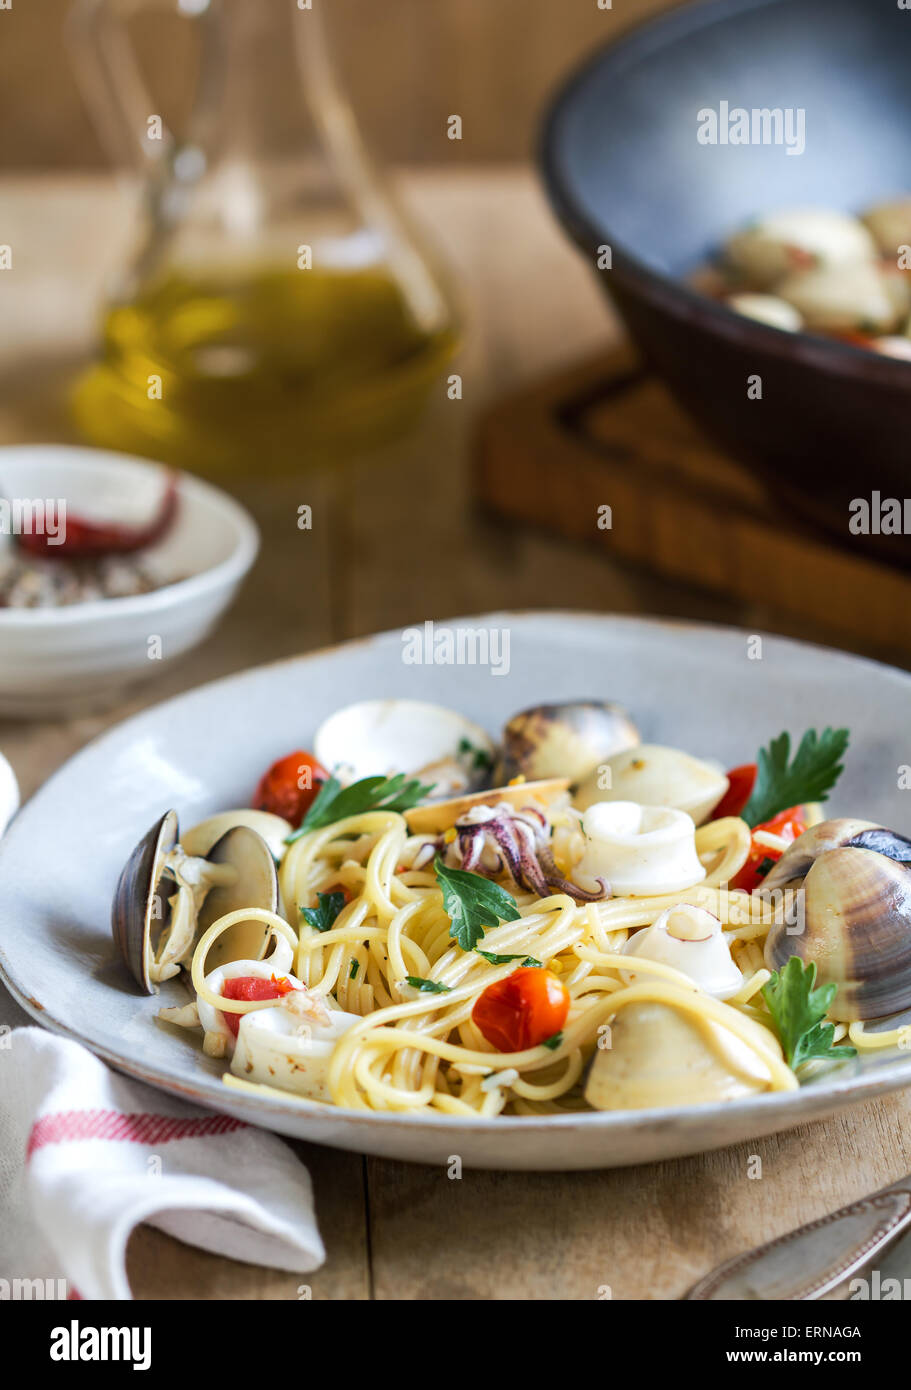 Spaghetti with squid, clam and prawn by sea salt Stock Photo